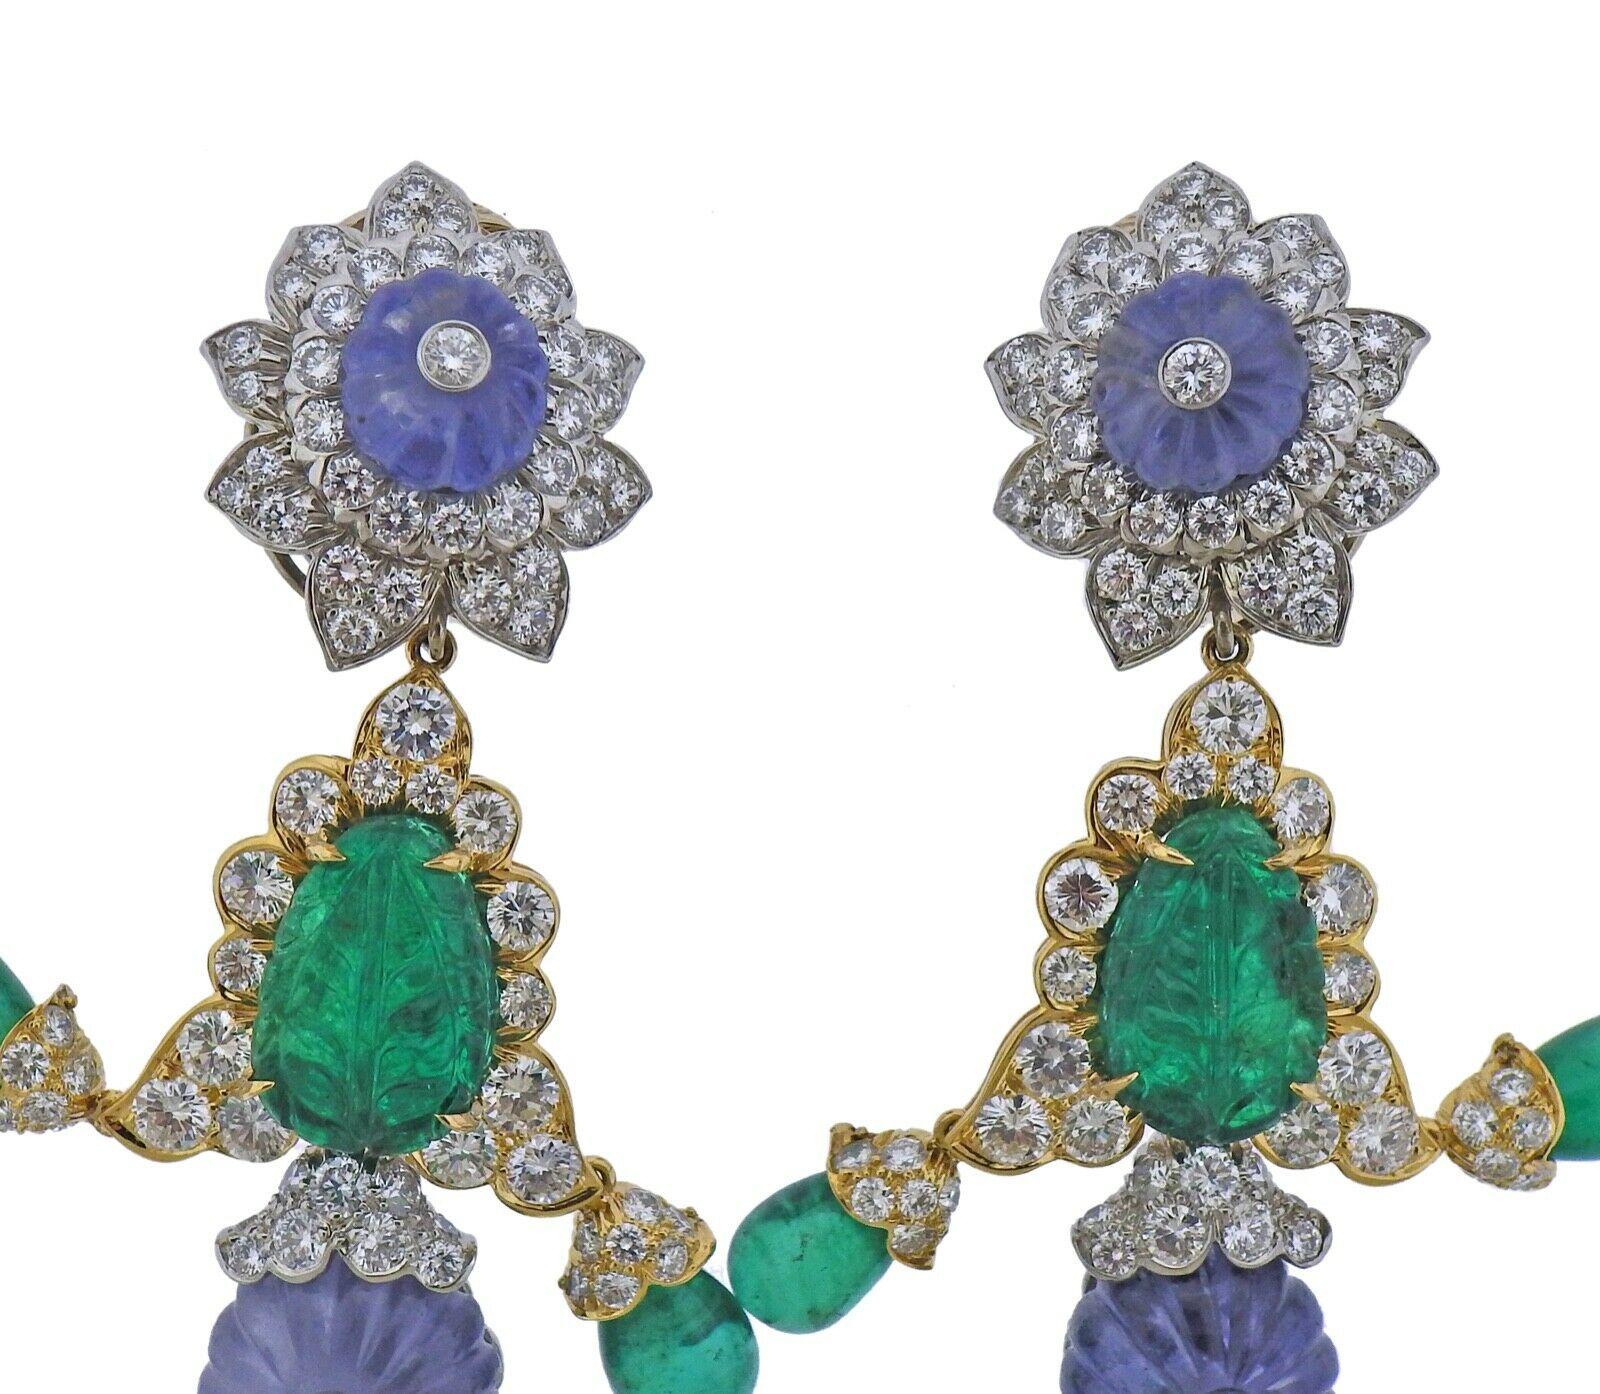 18k yellow gold and platinum drop earrings by David Webb. Set with approx. 5.50ctw of G/VS diamonds, carved sapphire and emeralds. Earrings measure 97mm x 28mm at widest point. Two detachable drops can convert earrings to be 65mm long or 22mm.